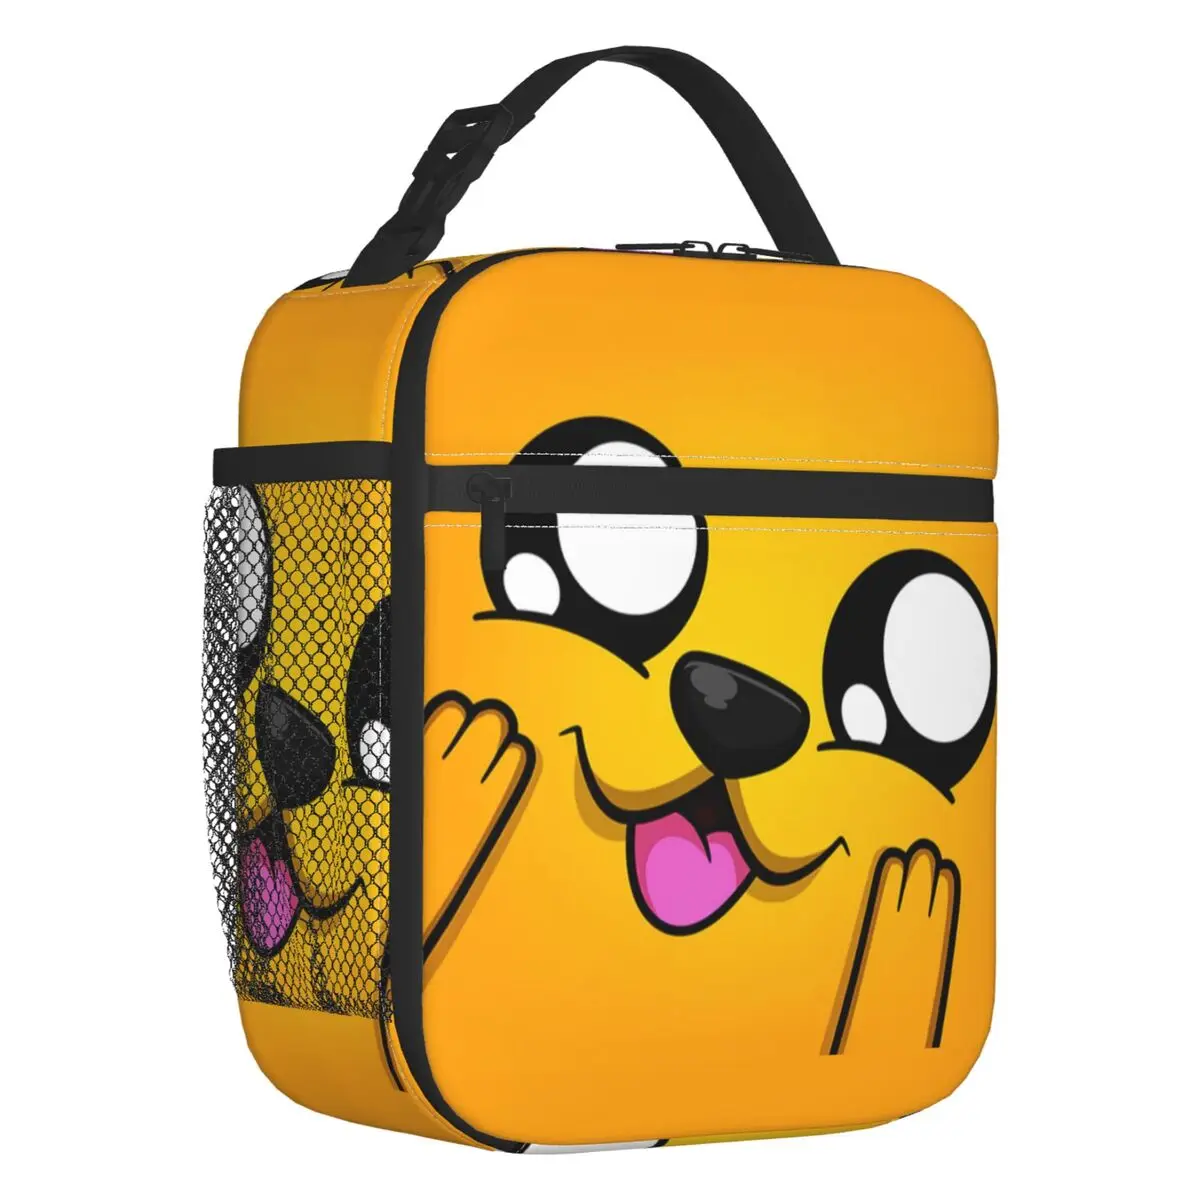 Cute Mikecrack Funny Meme Portable Lunch Box Women Leakproof Cartoon Comic Thermal Cooler Food Insulated Lunch Bag Office Work